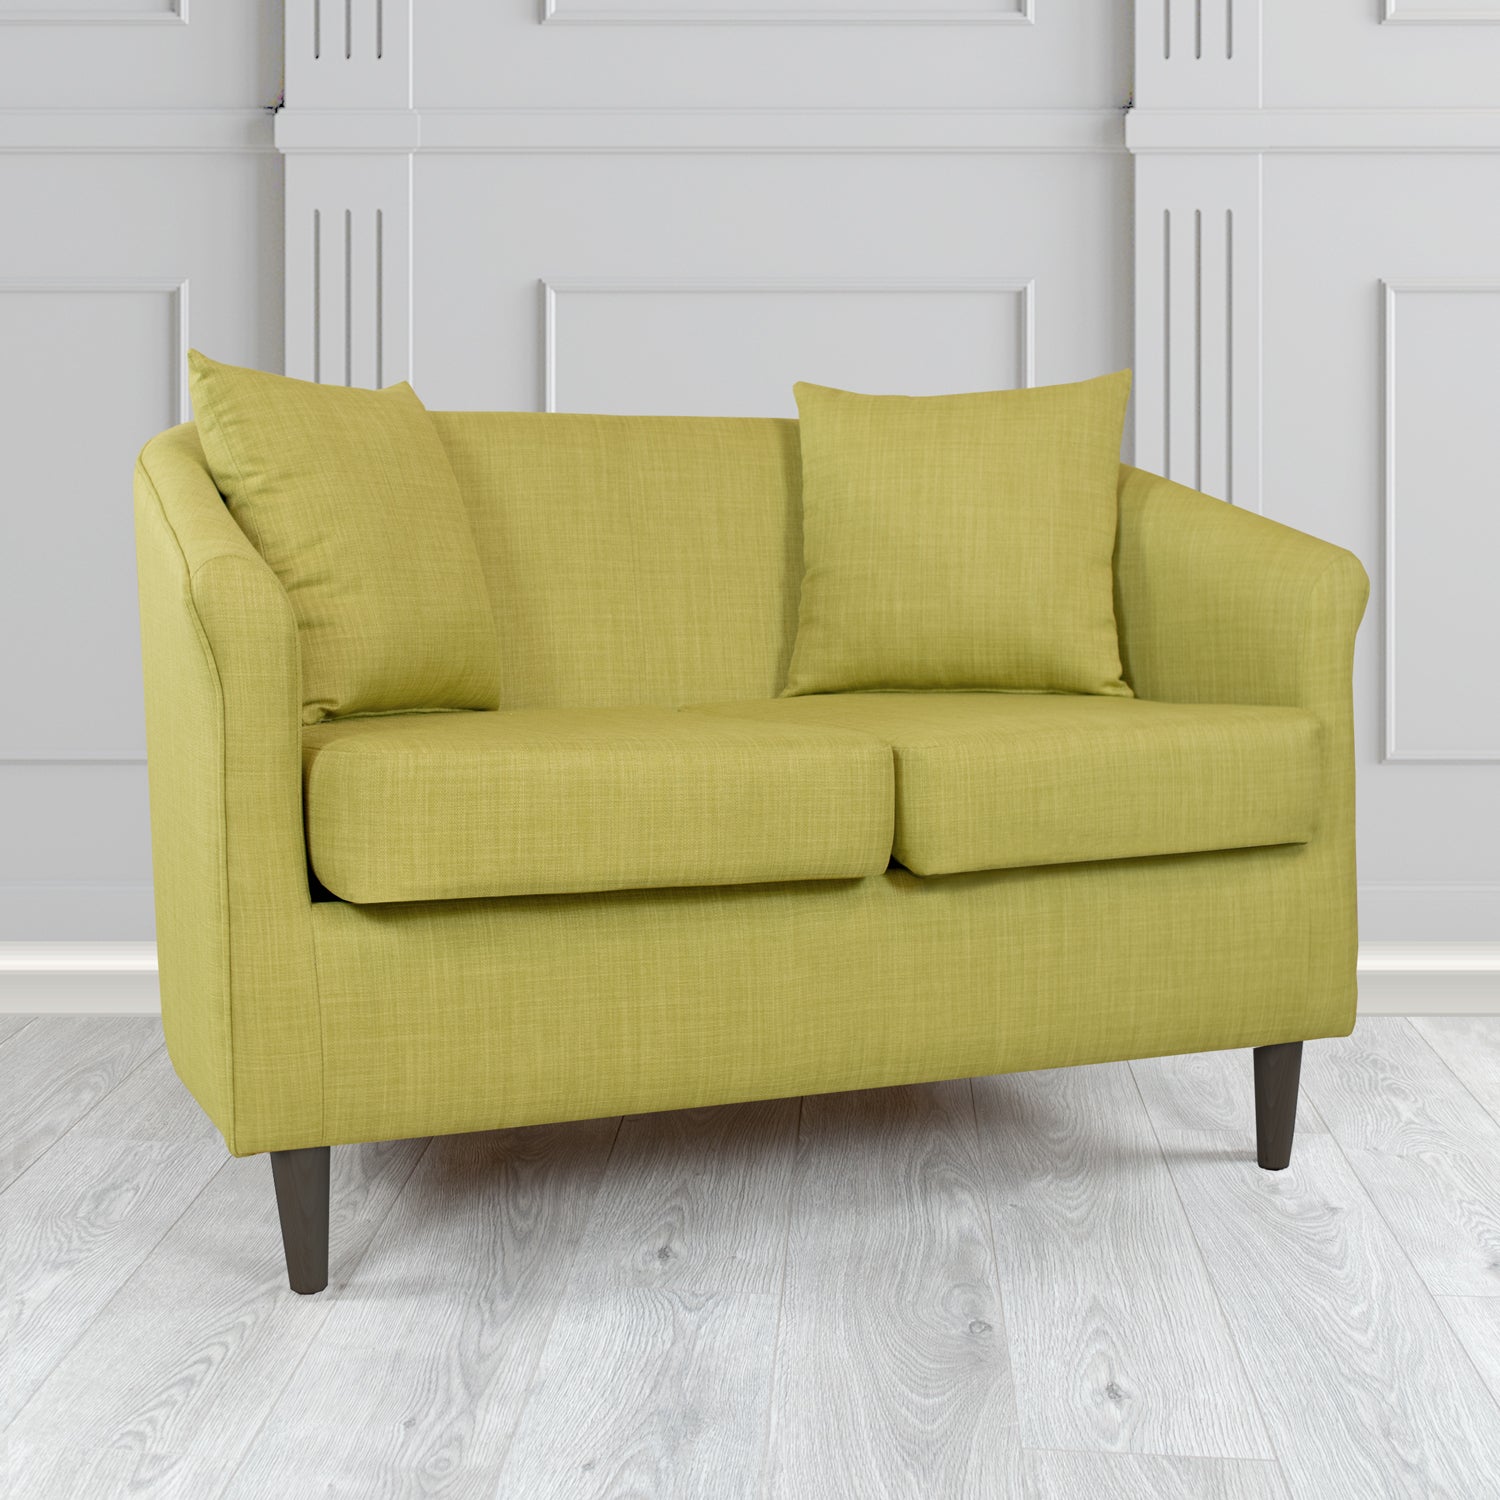 St Tropez Charles Olive Plain Linen Fabric 2 Seater Tub Sofa with Scatter Cushions - The Tub Chair Shop